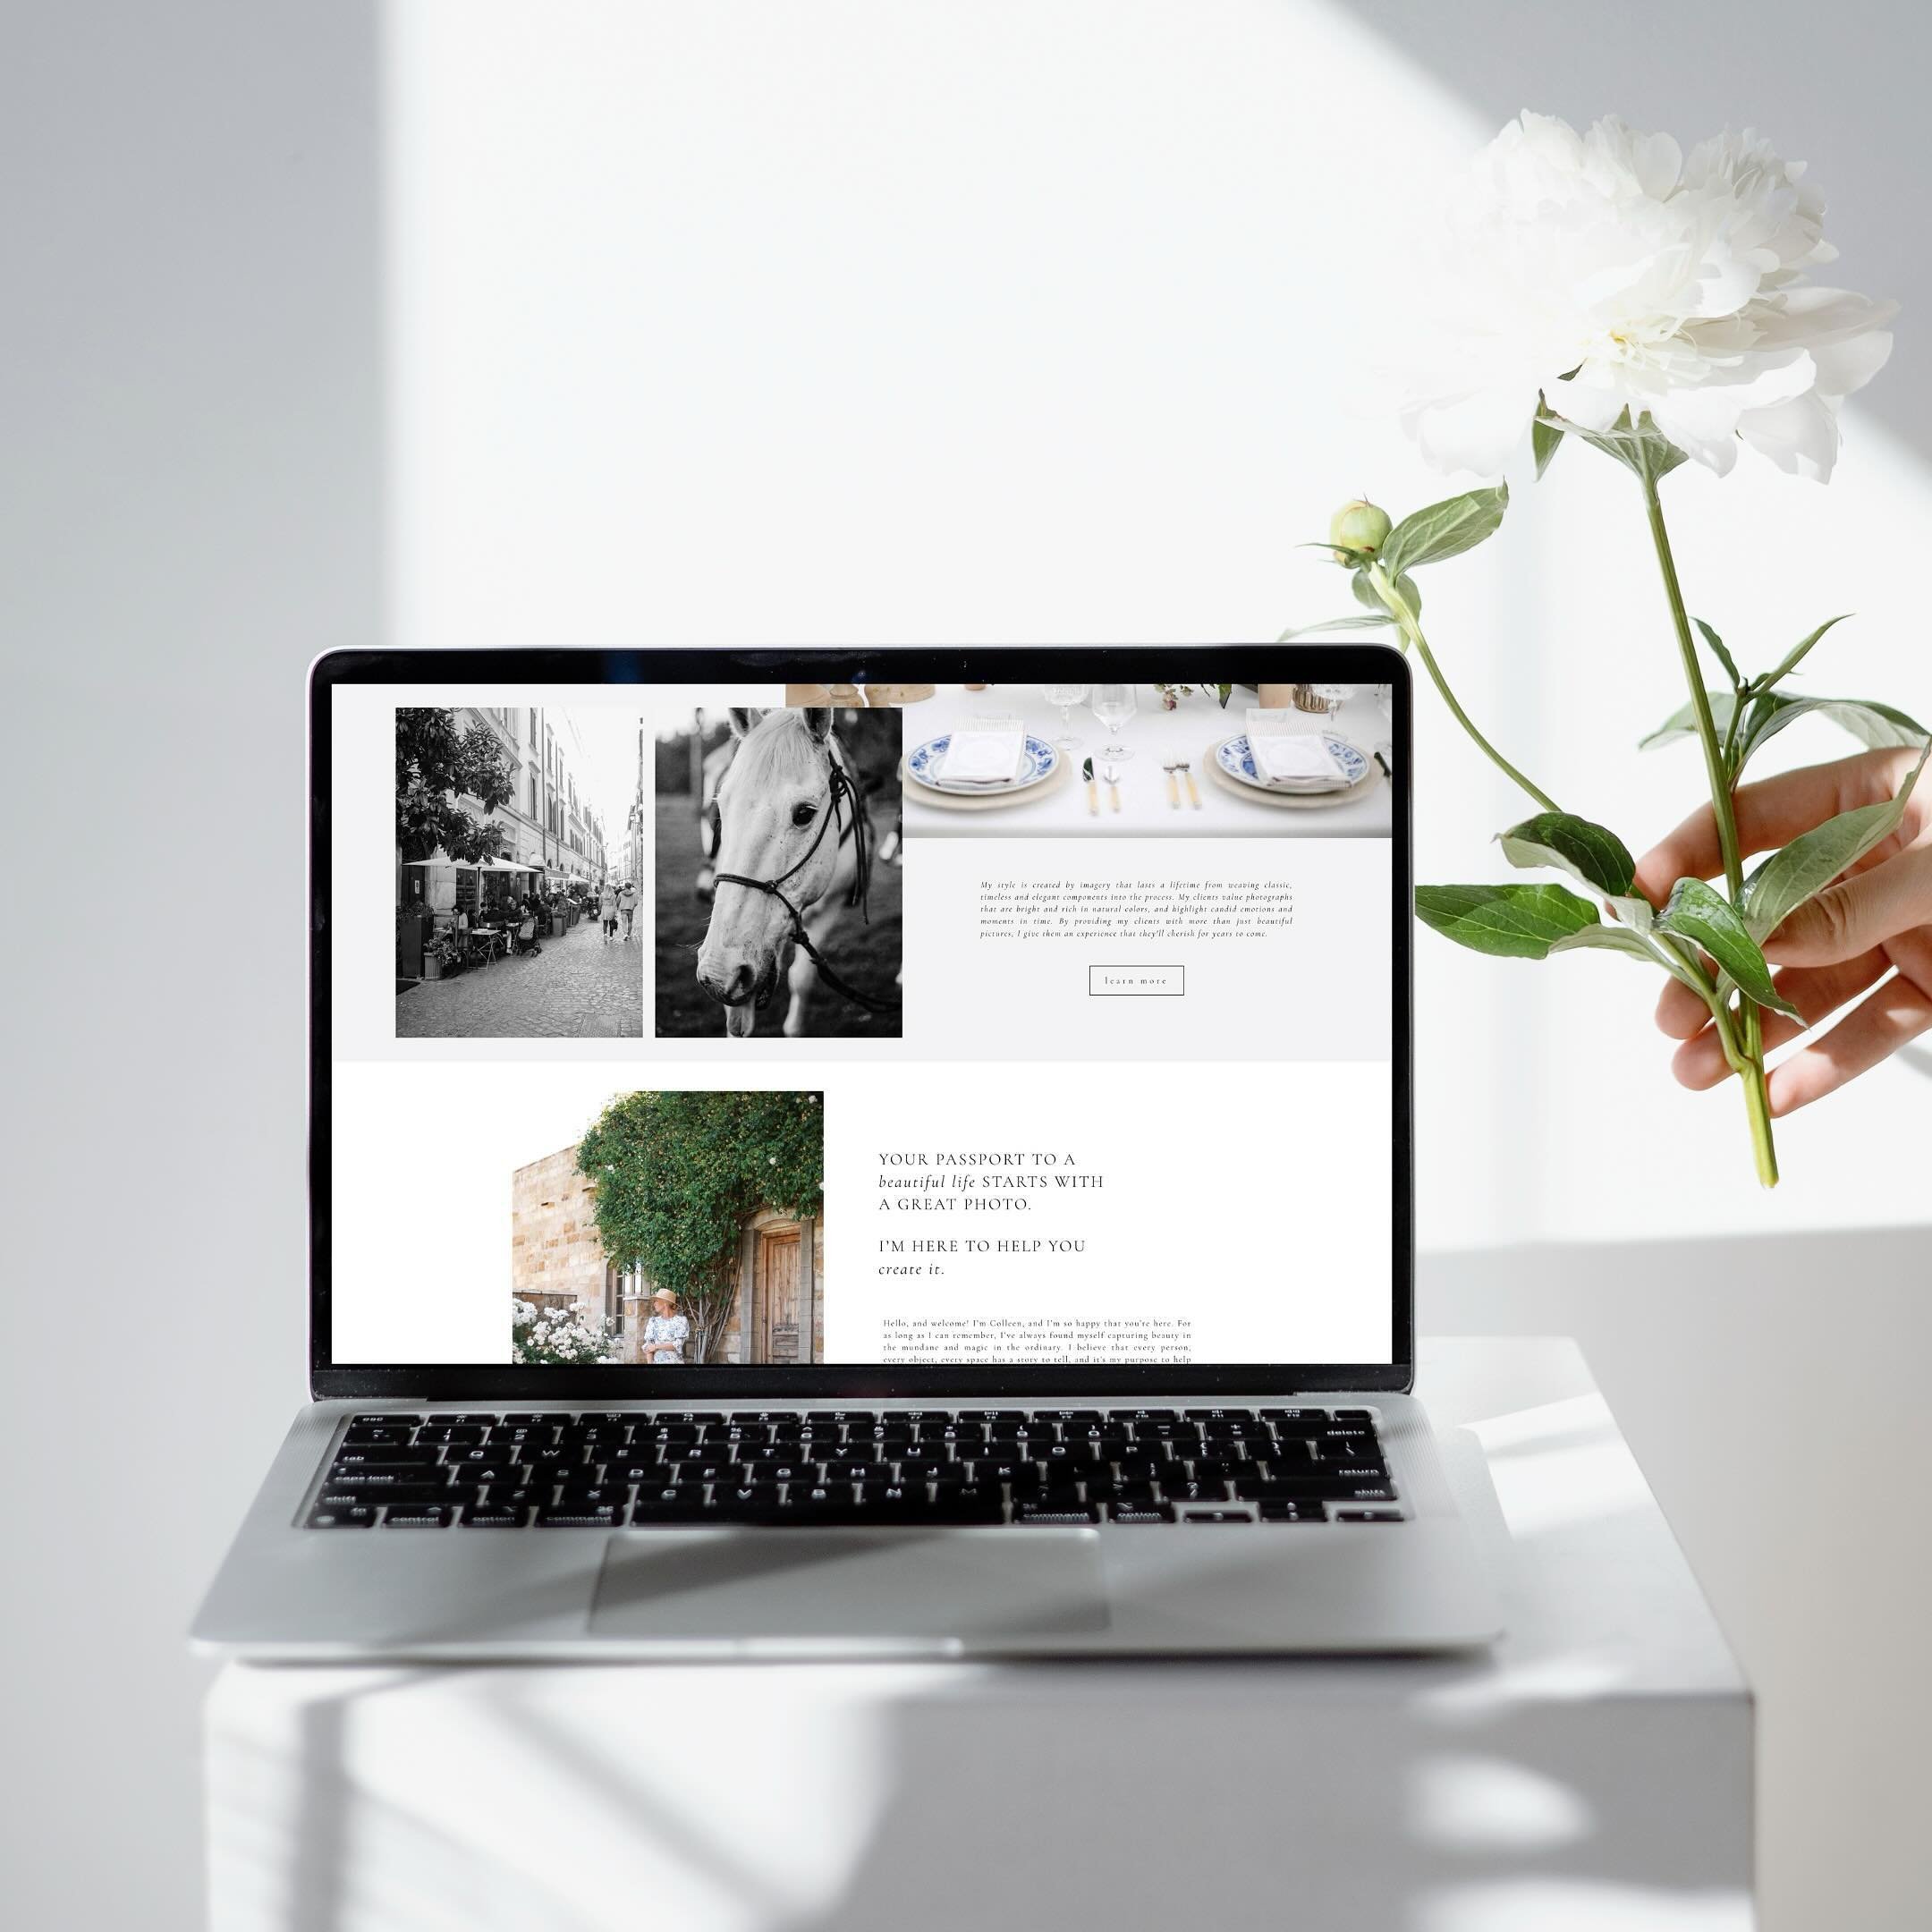 &ldquo;Heather, your websites are simply the best! Your eye for marrying functional, aesthetic and interactive website design stood out to me right away. I had the hardest time selecting a template to start with because they were all so gorgeous. You